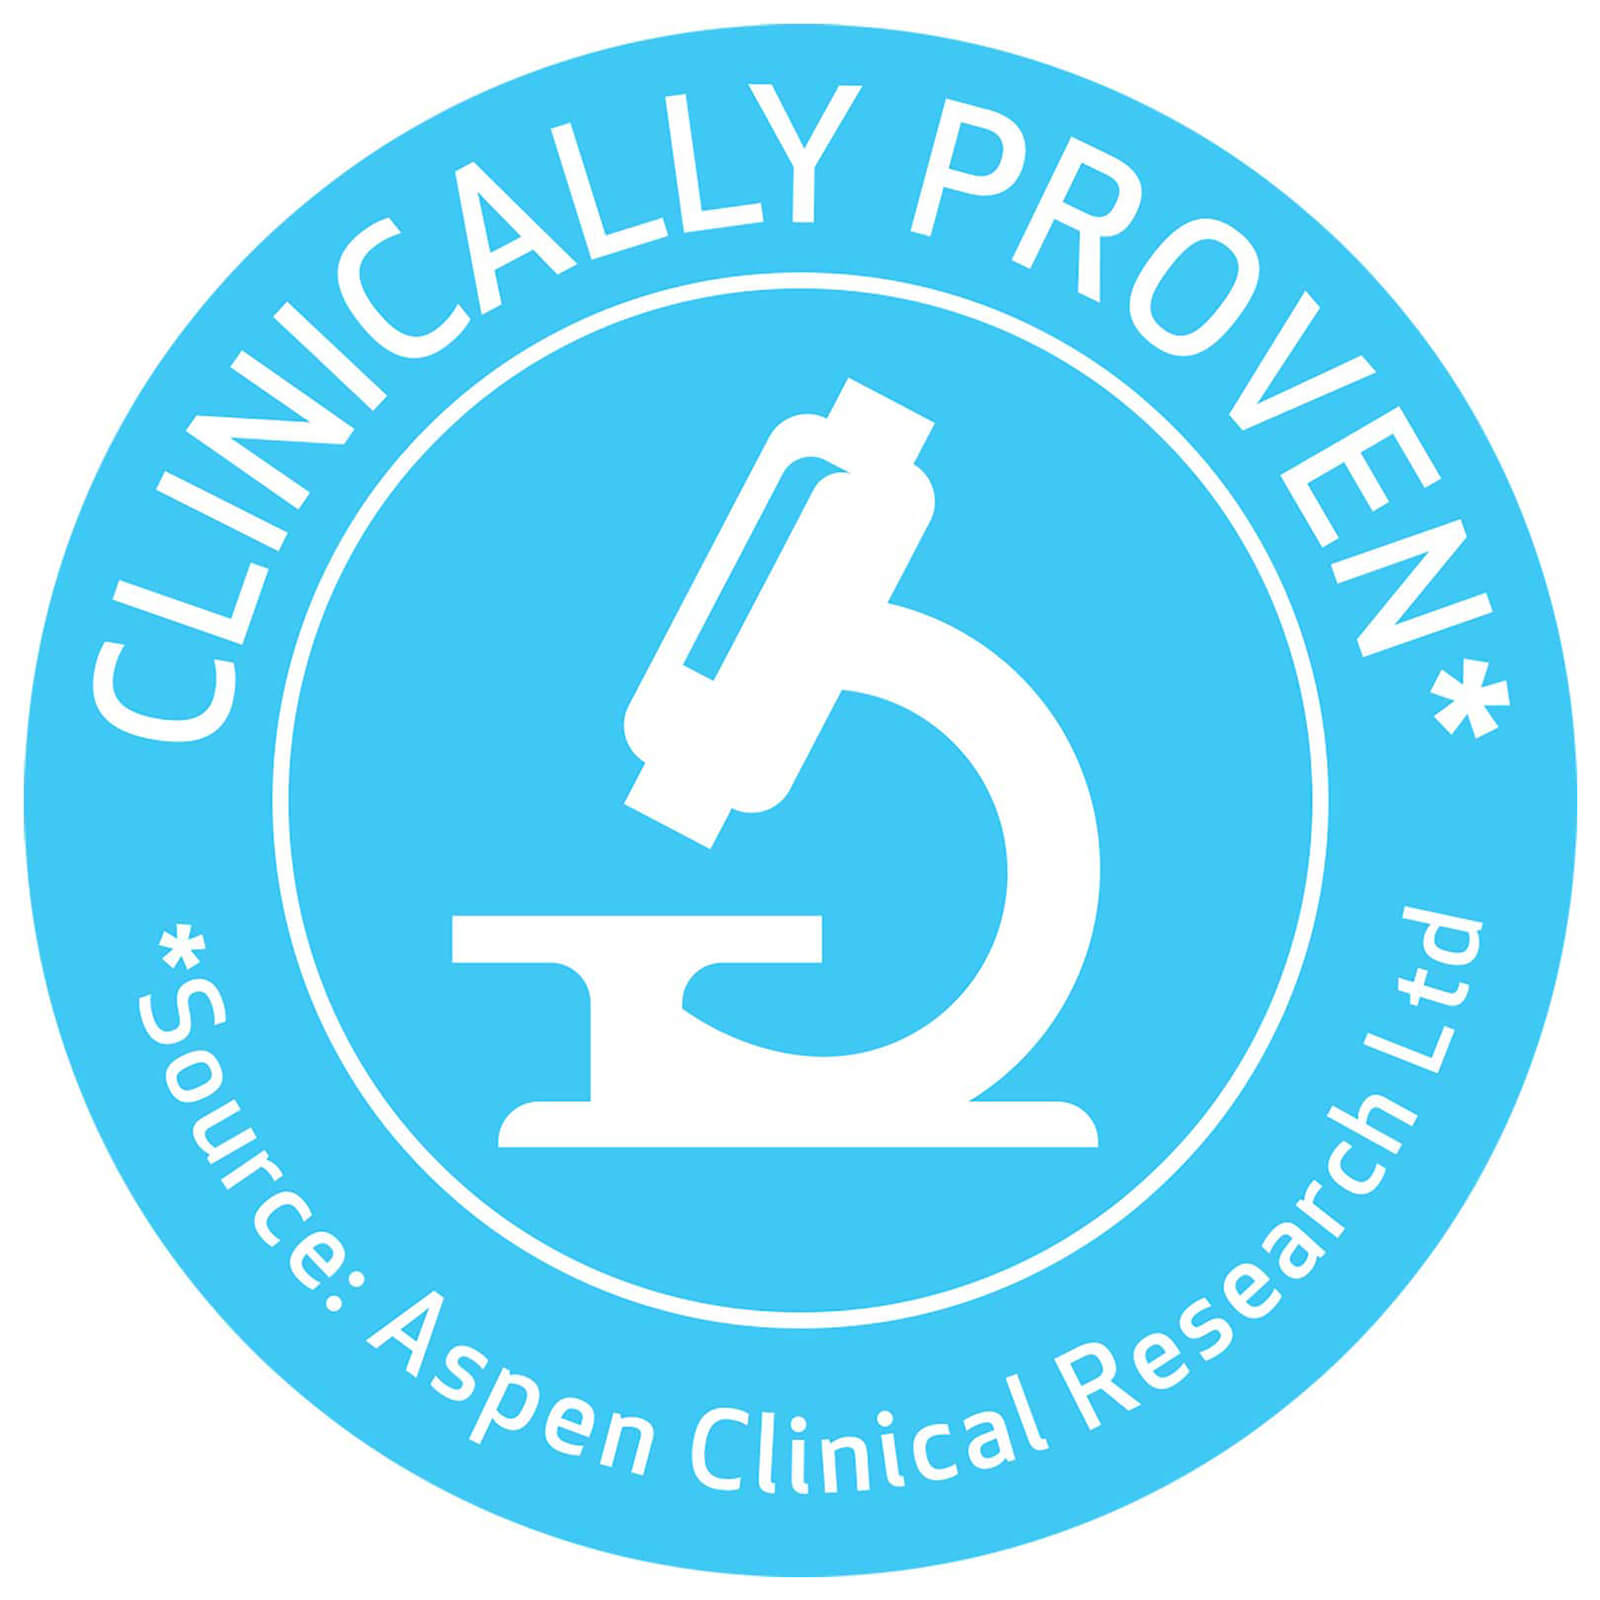 Clinically proven* *Source: Aspen clinical research LTD